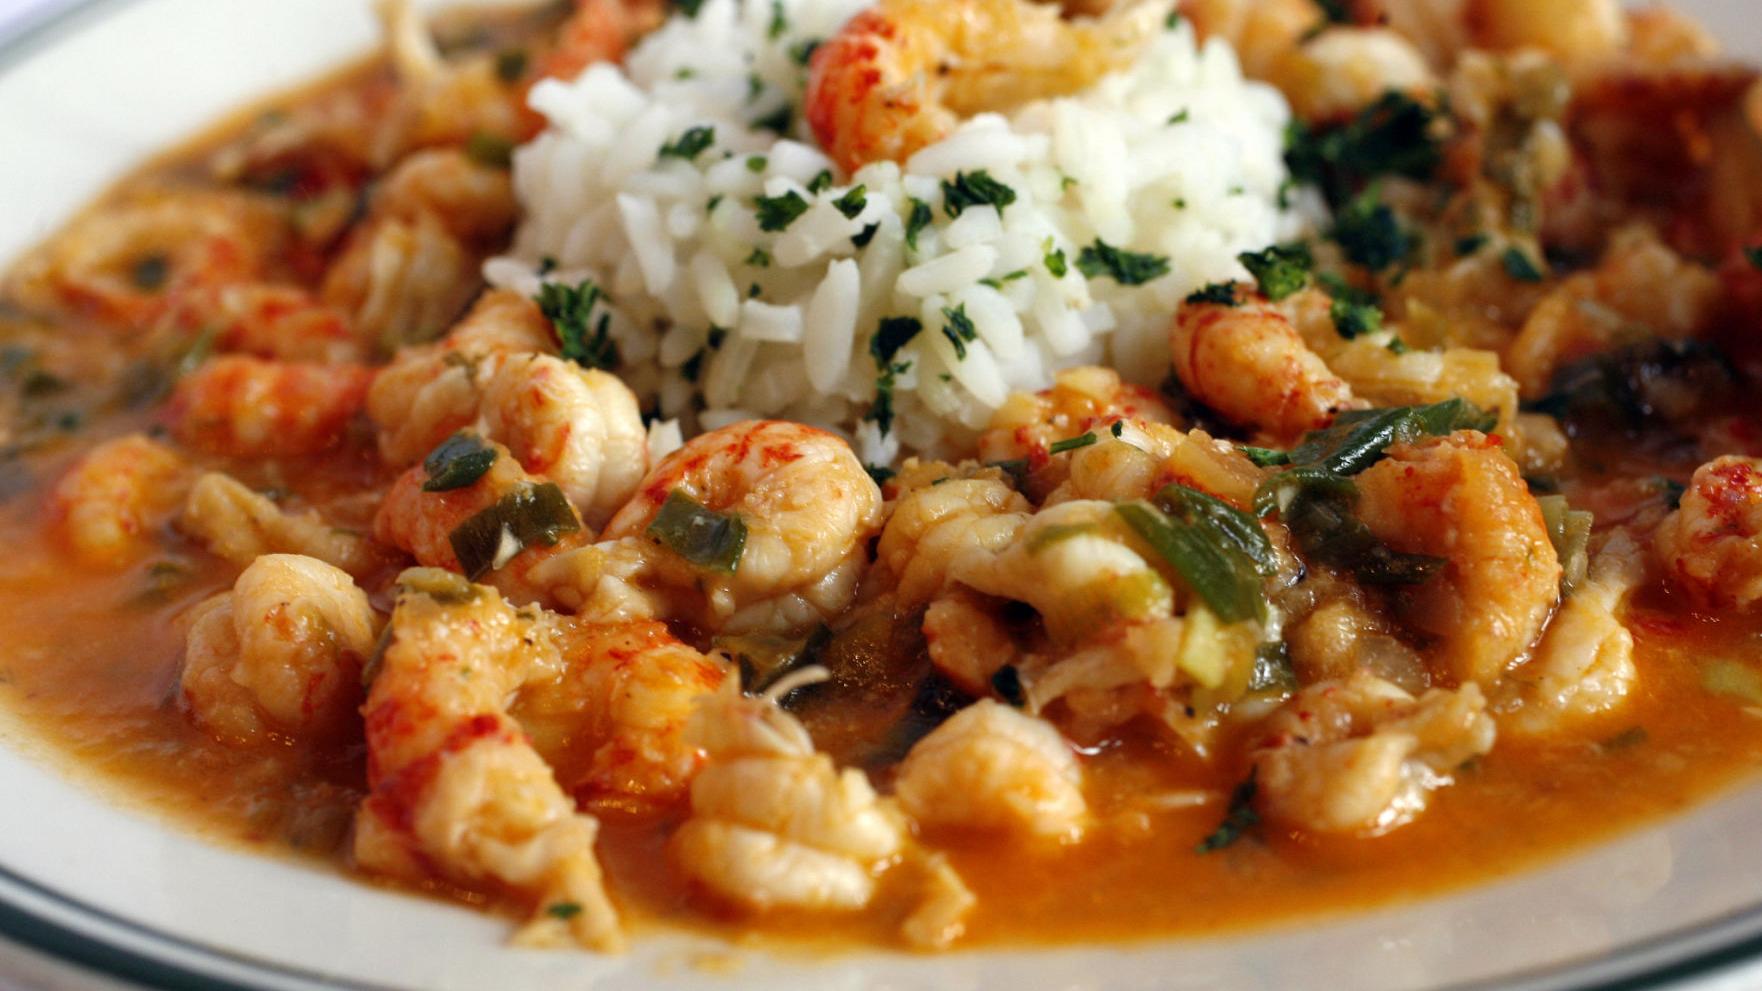 Where To Find Cajun Food In New Orleans